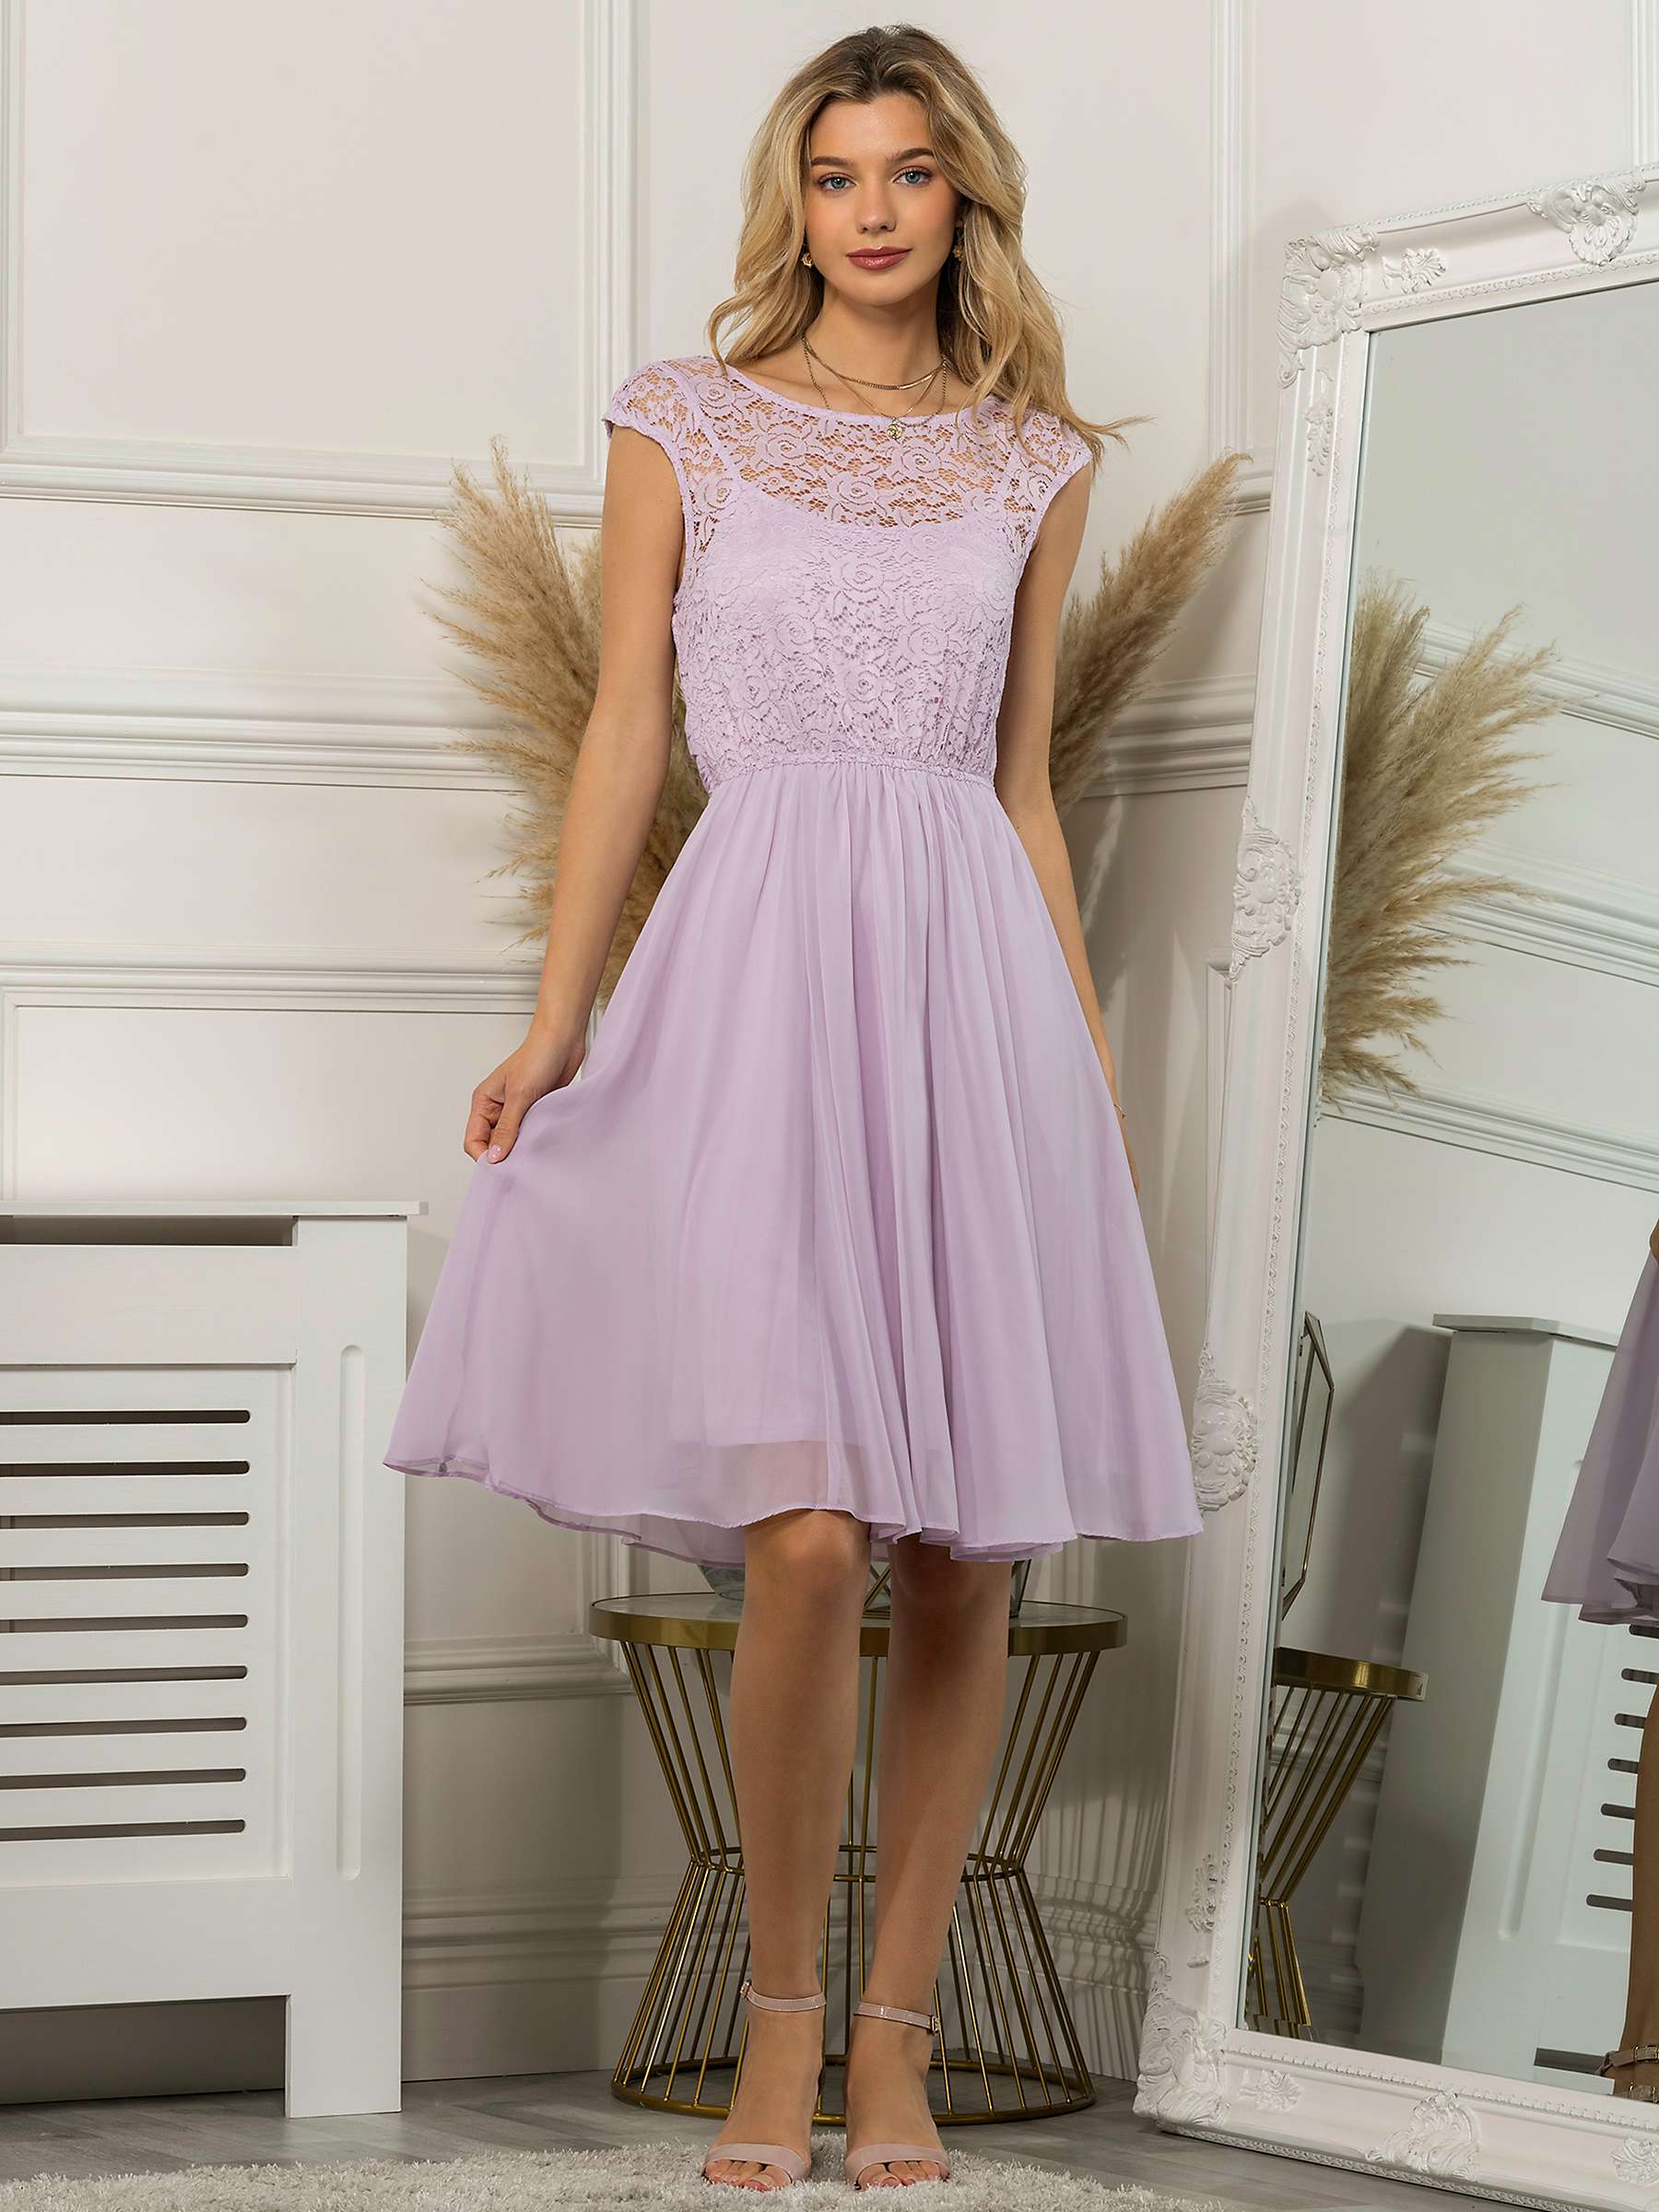 Buy Jolie Moi Lace Bodice Flared Dress, Lilac Online at johnlewis.com